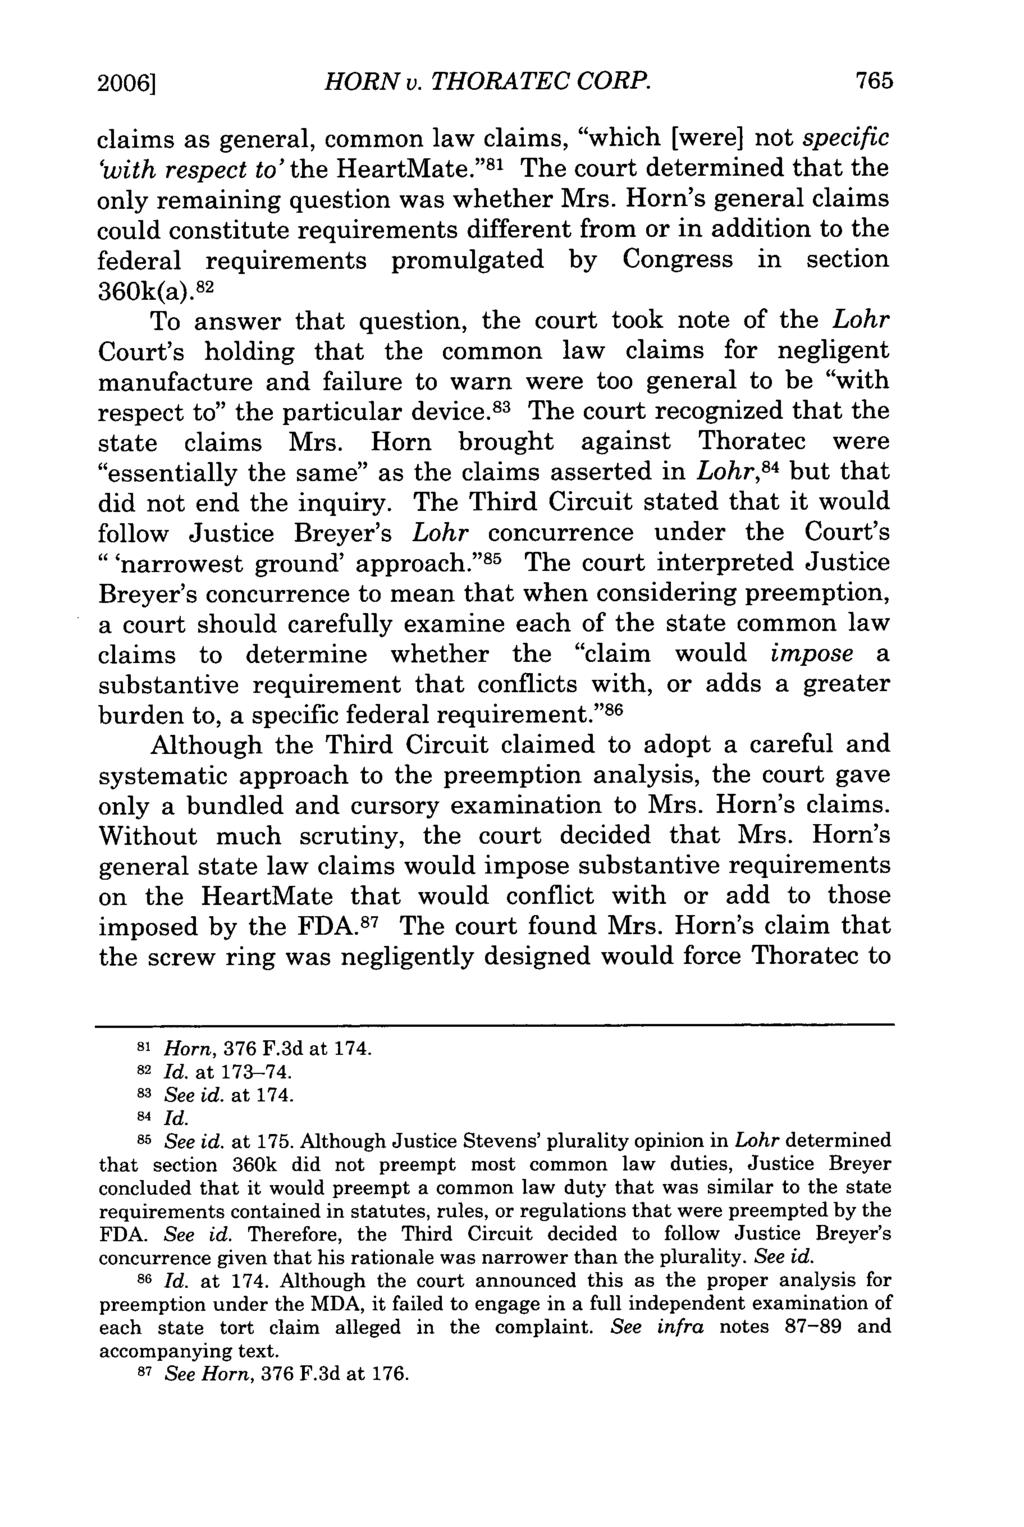 2006] HORN v. THORATEC CORP. claims as general, common law claims, "which [were] not specific 'with respect to' the HeartMate.